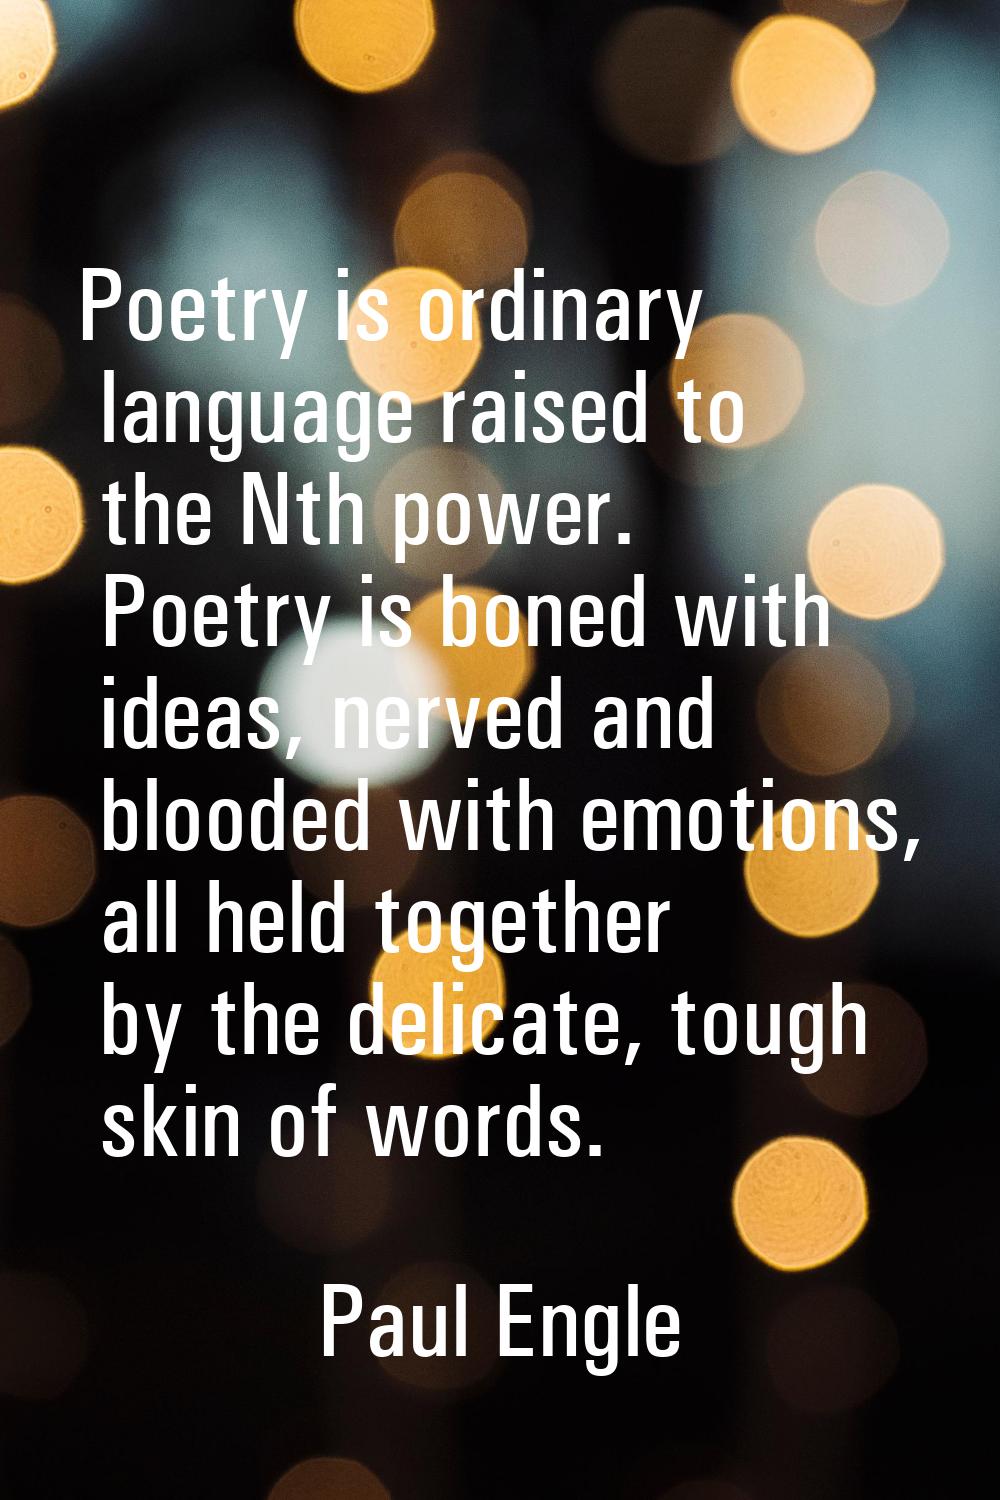 Poetry is ordinary language raised to the Nth power. Poetry is boned with ideas, nerved and blooded